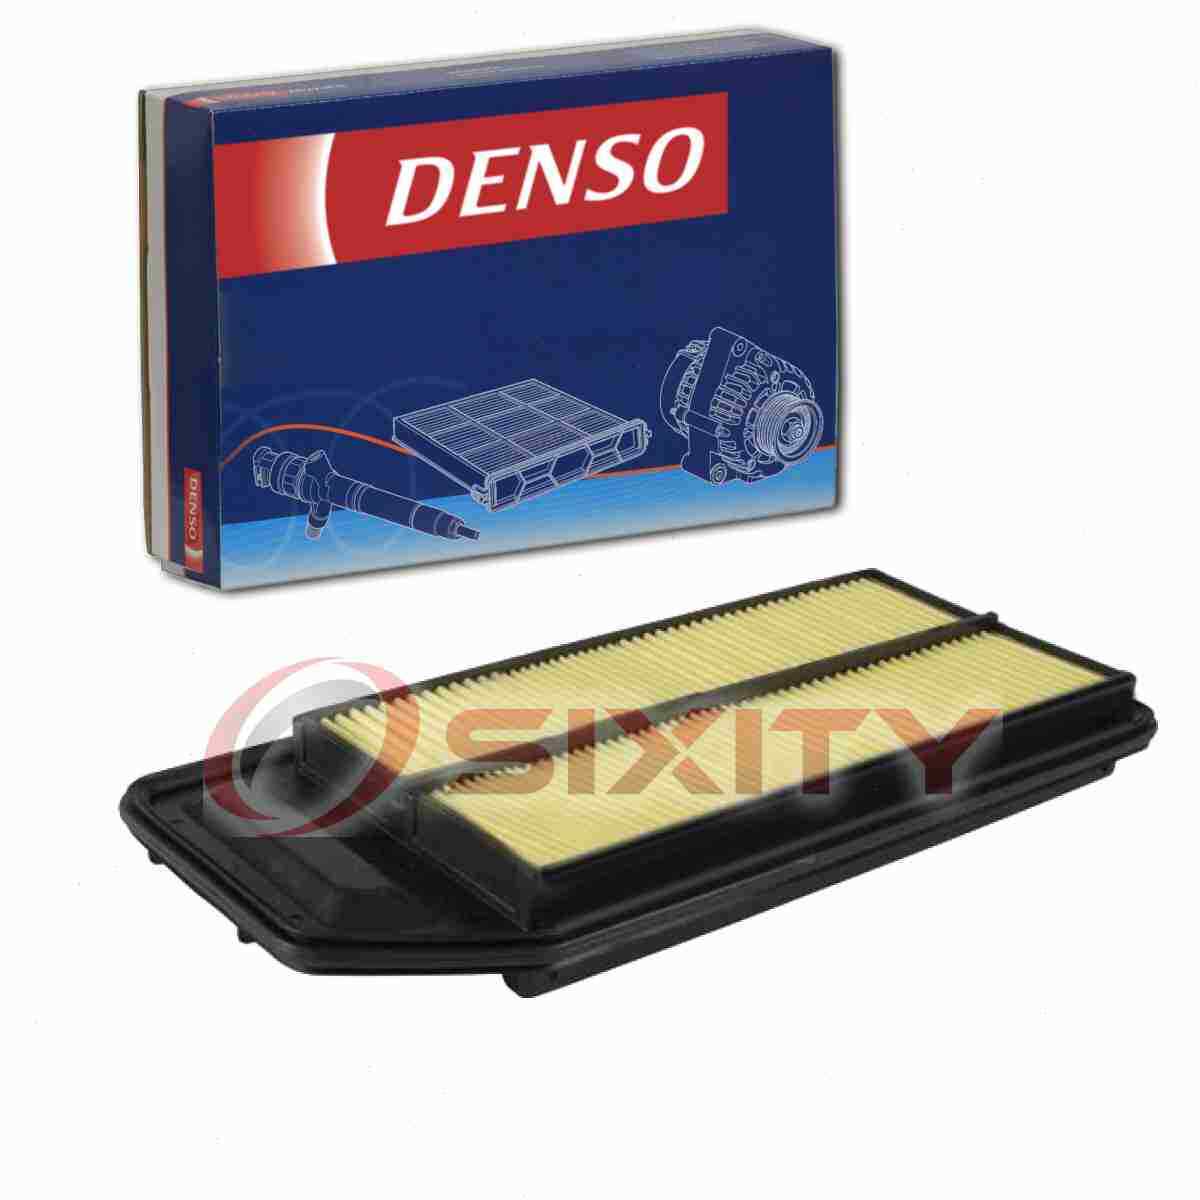 DENSO 143-3137 Air Filter for CA9564 A25503 46831 17220-RBB-A00 of